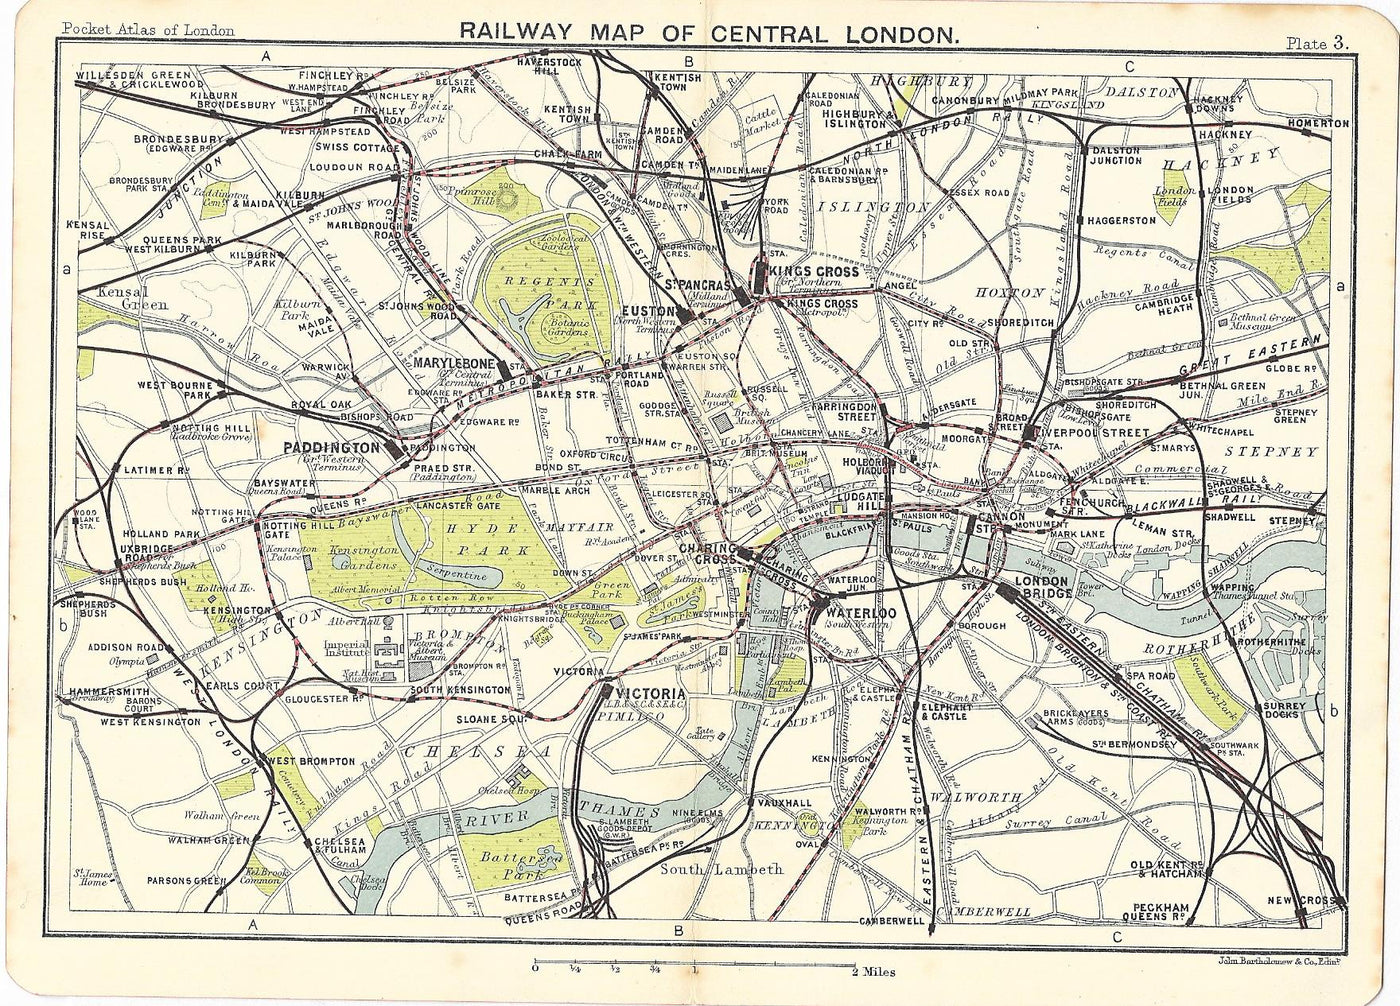 Railway map of Central London published 1917